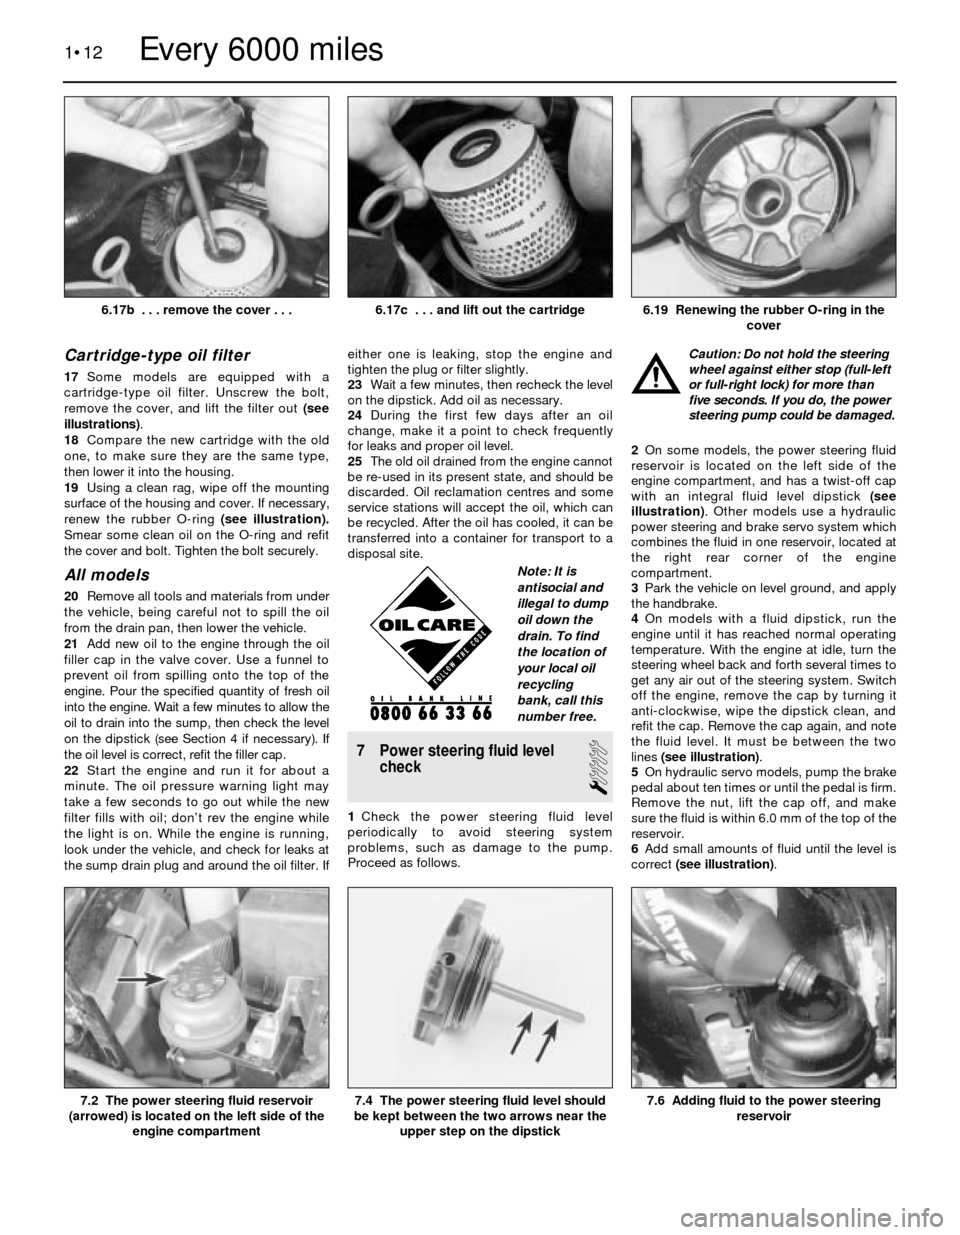 BMW 3 SERIES 1984 E30 Workshop Manual Cartridge-type oil filter
17Some models are equipped with a
cartridge-type oil filter. Unscrew the bolt,
remove the cover, and lift the filter out (see
illustrations).
18Compare the new cartridge with